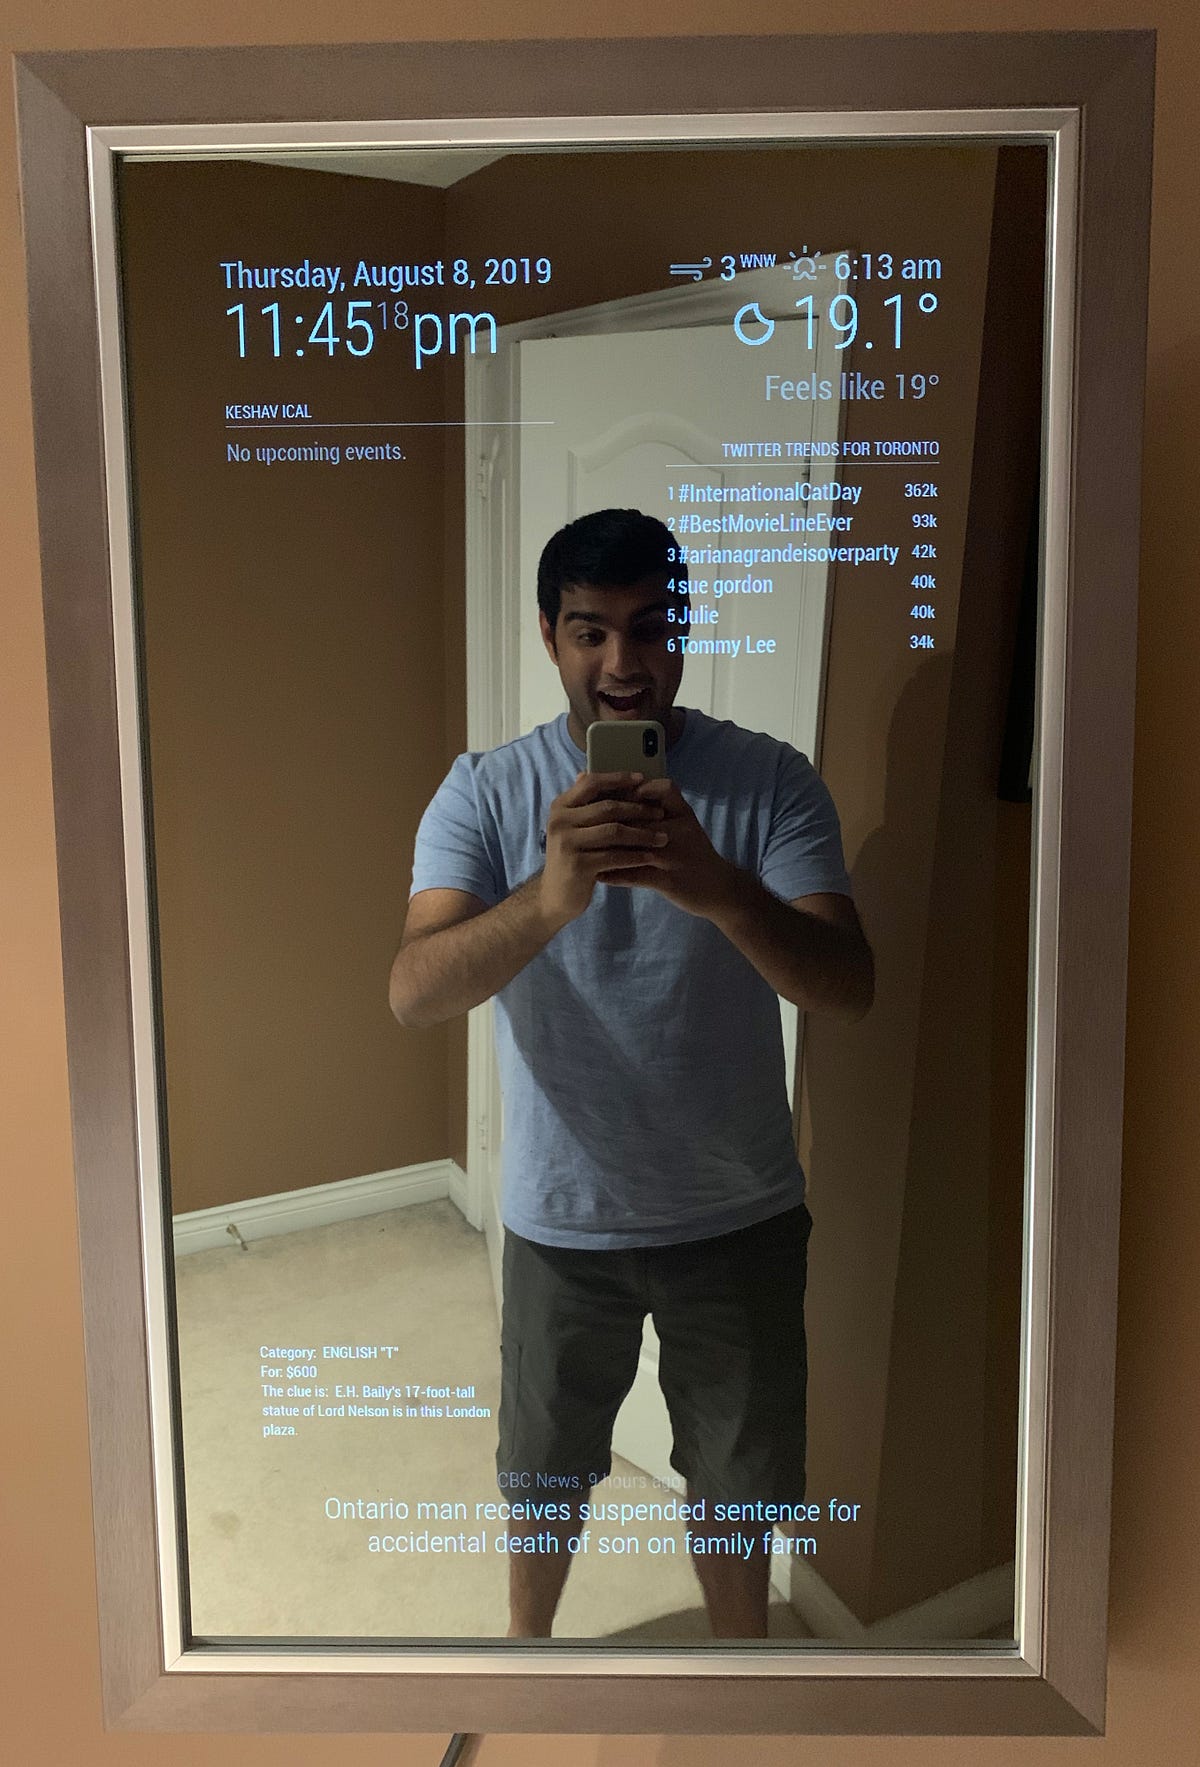 A Step by Step Guide to Build your own Smart Mirror | by Keshav Chawla